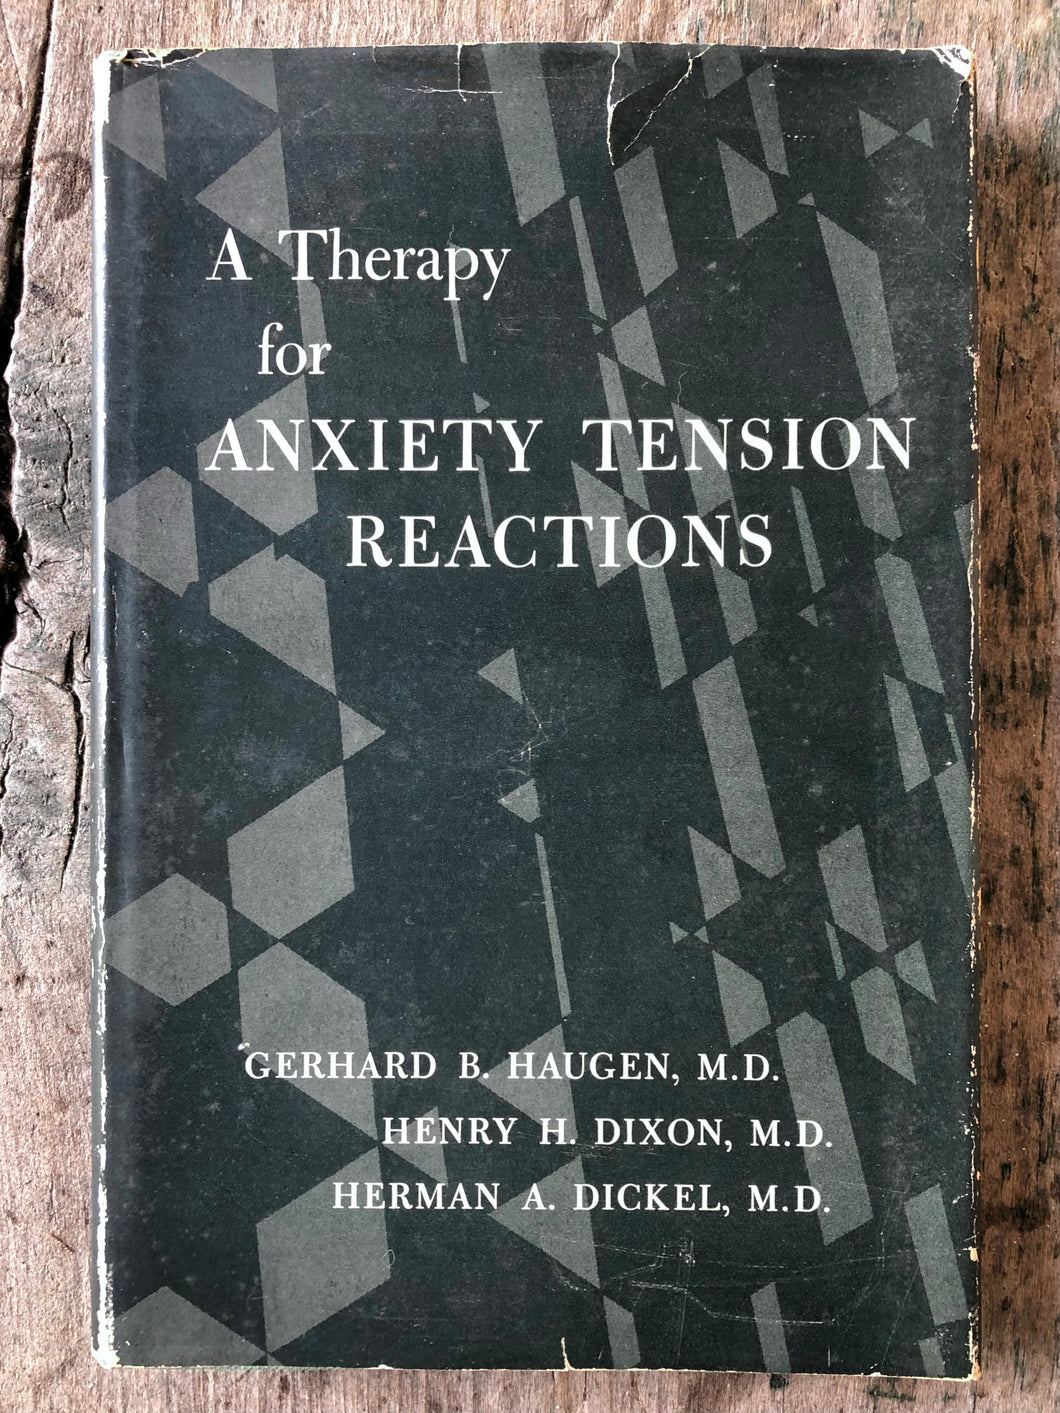 A Therapy for Anxiety Tension Reactions by Gerhard B. Haugen, Henry H. Dixon, and Herman A. Dickel